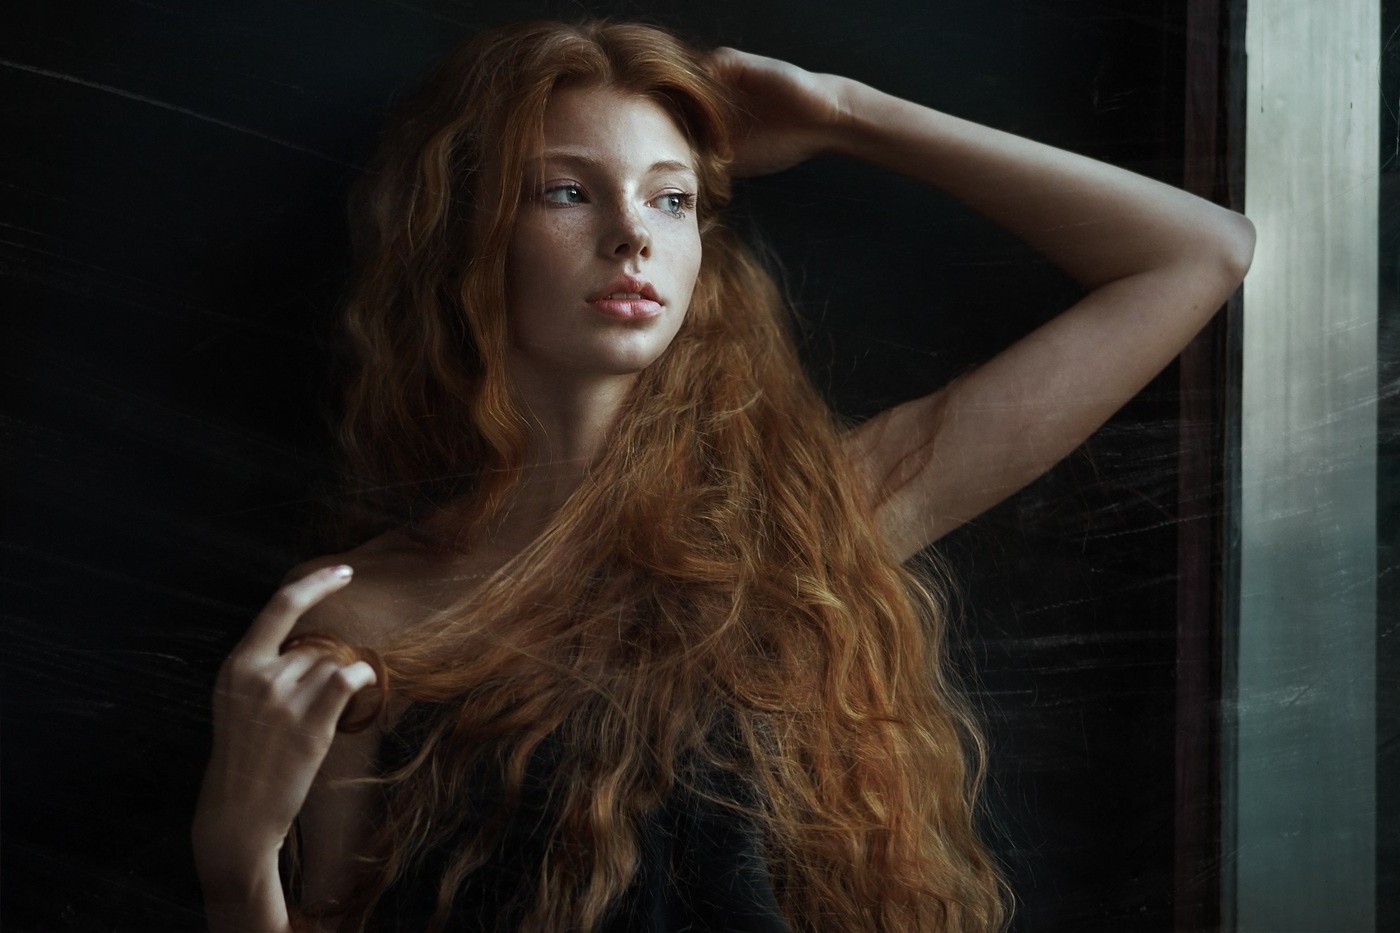 women, Model, Redhead, Long Hair, Freckles, Wavy Hair, Looking Away, Open Mouth, Bare Shoulders, Juicy Lips, Arms Up, Window, Scratches, Face Wallpaper